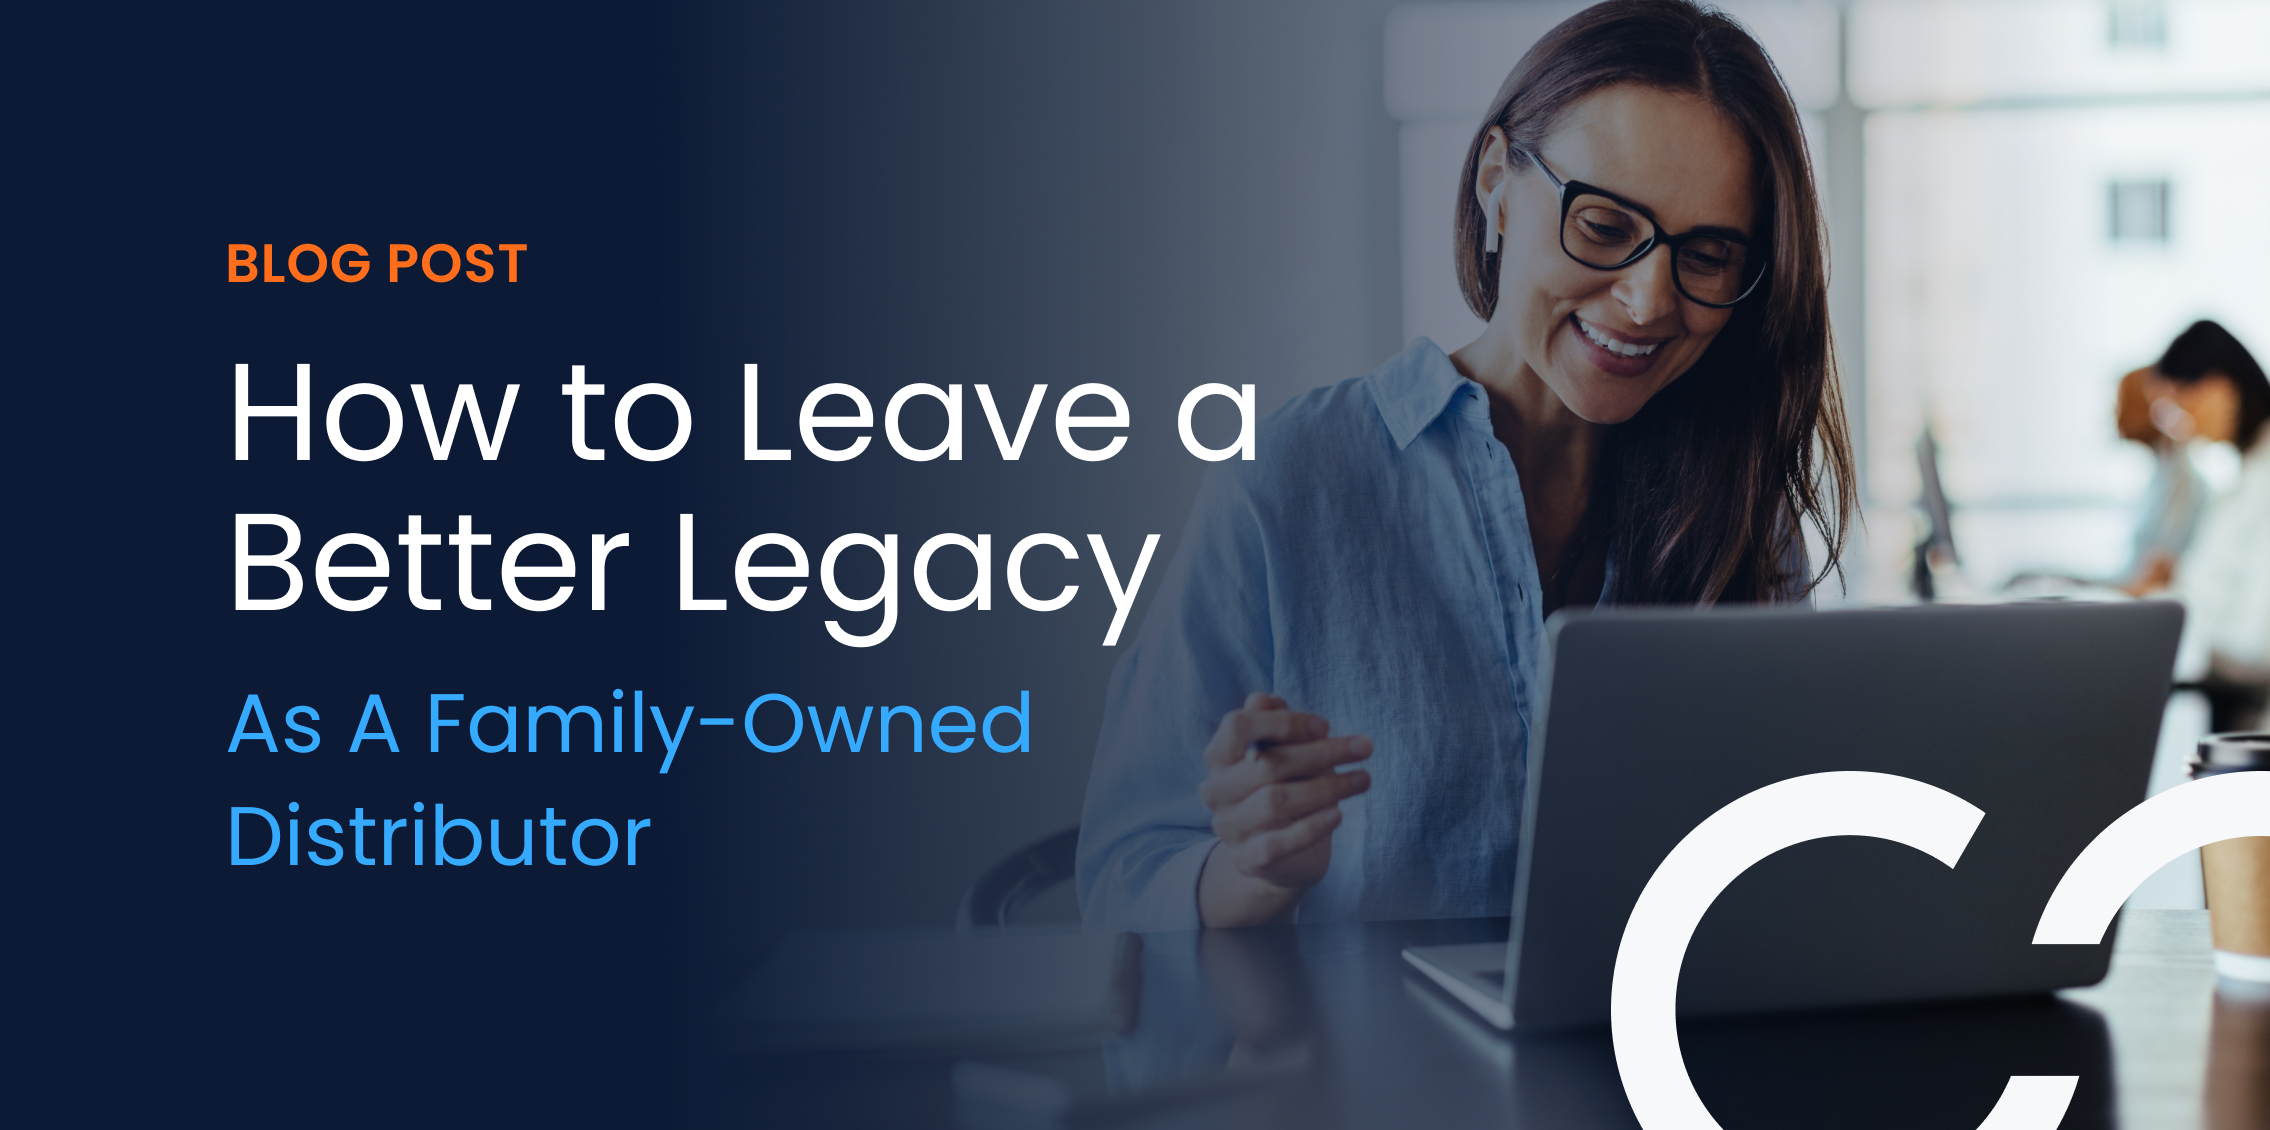 legacy planning with BI and CRM is possible with comprehensive and modern distributor sales technology